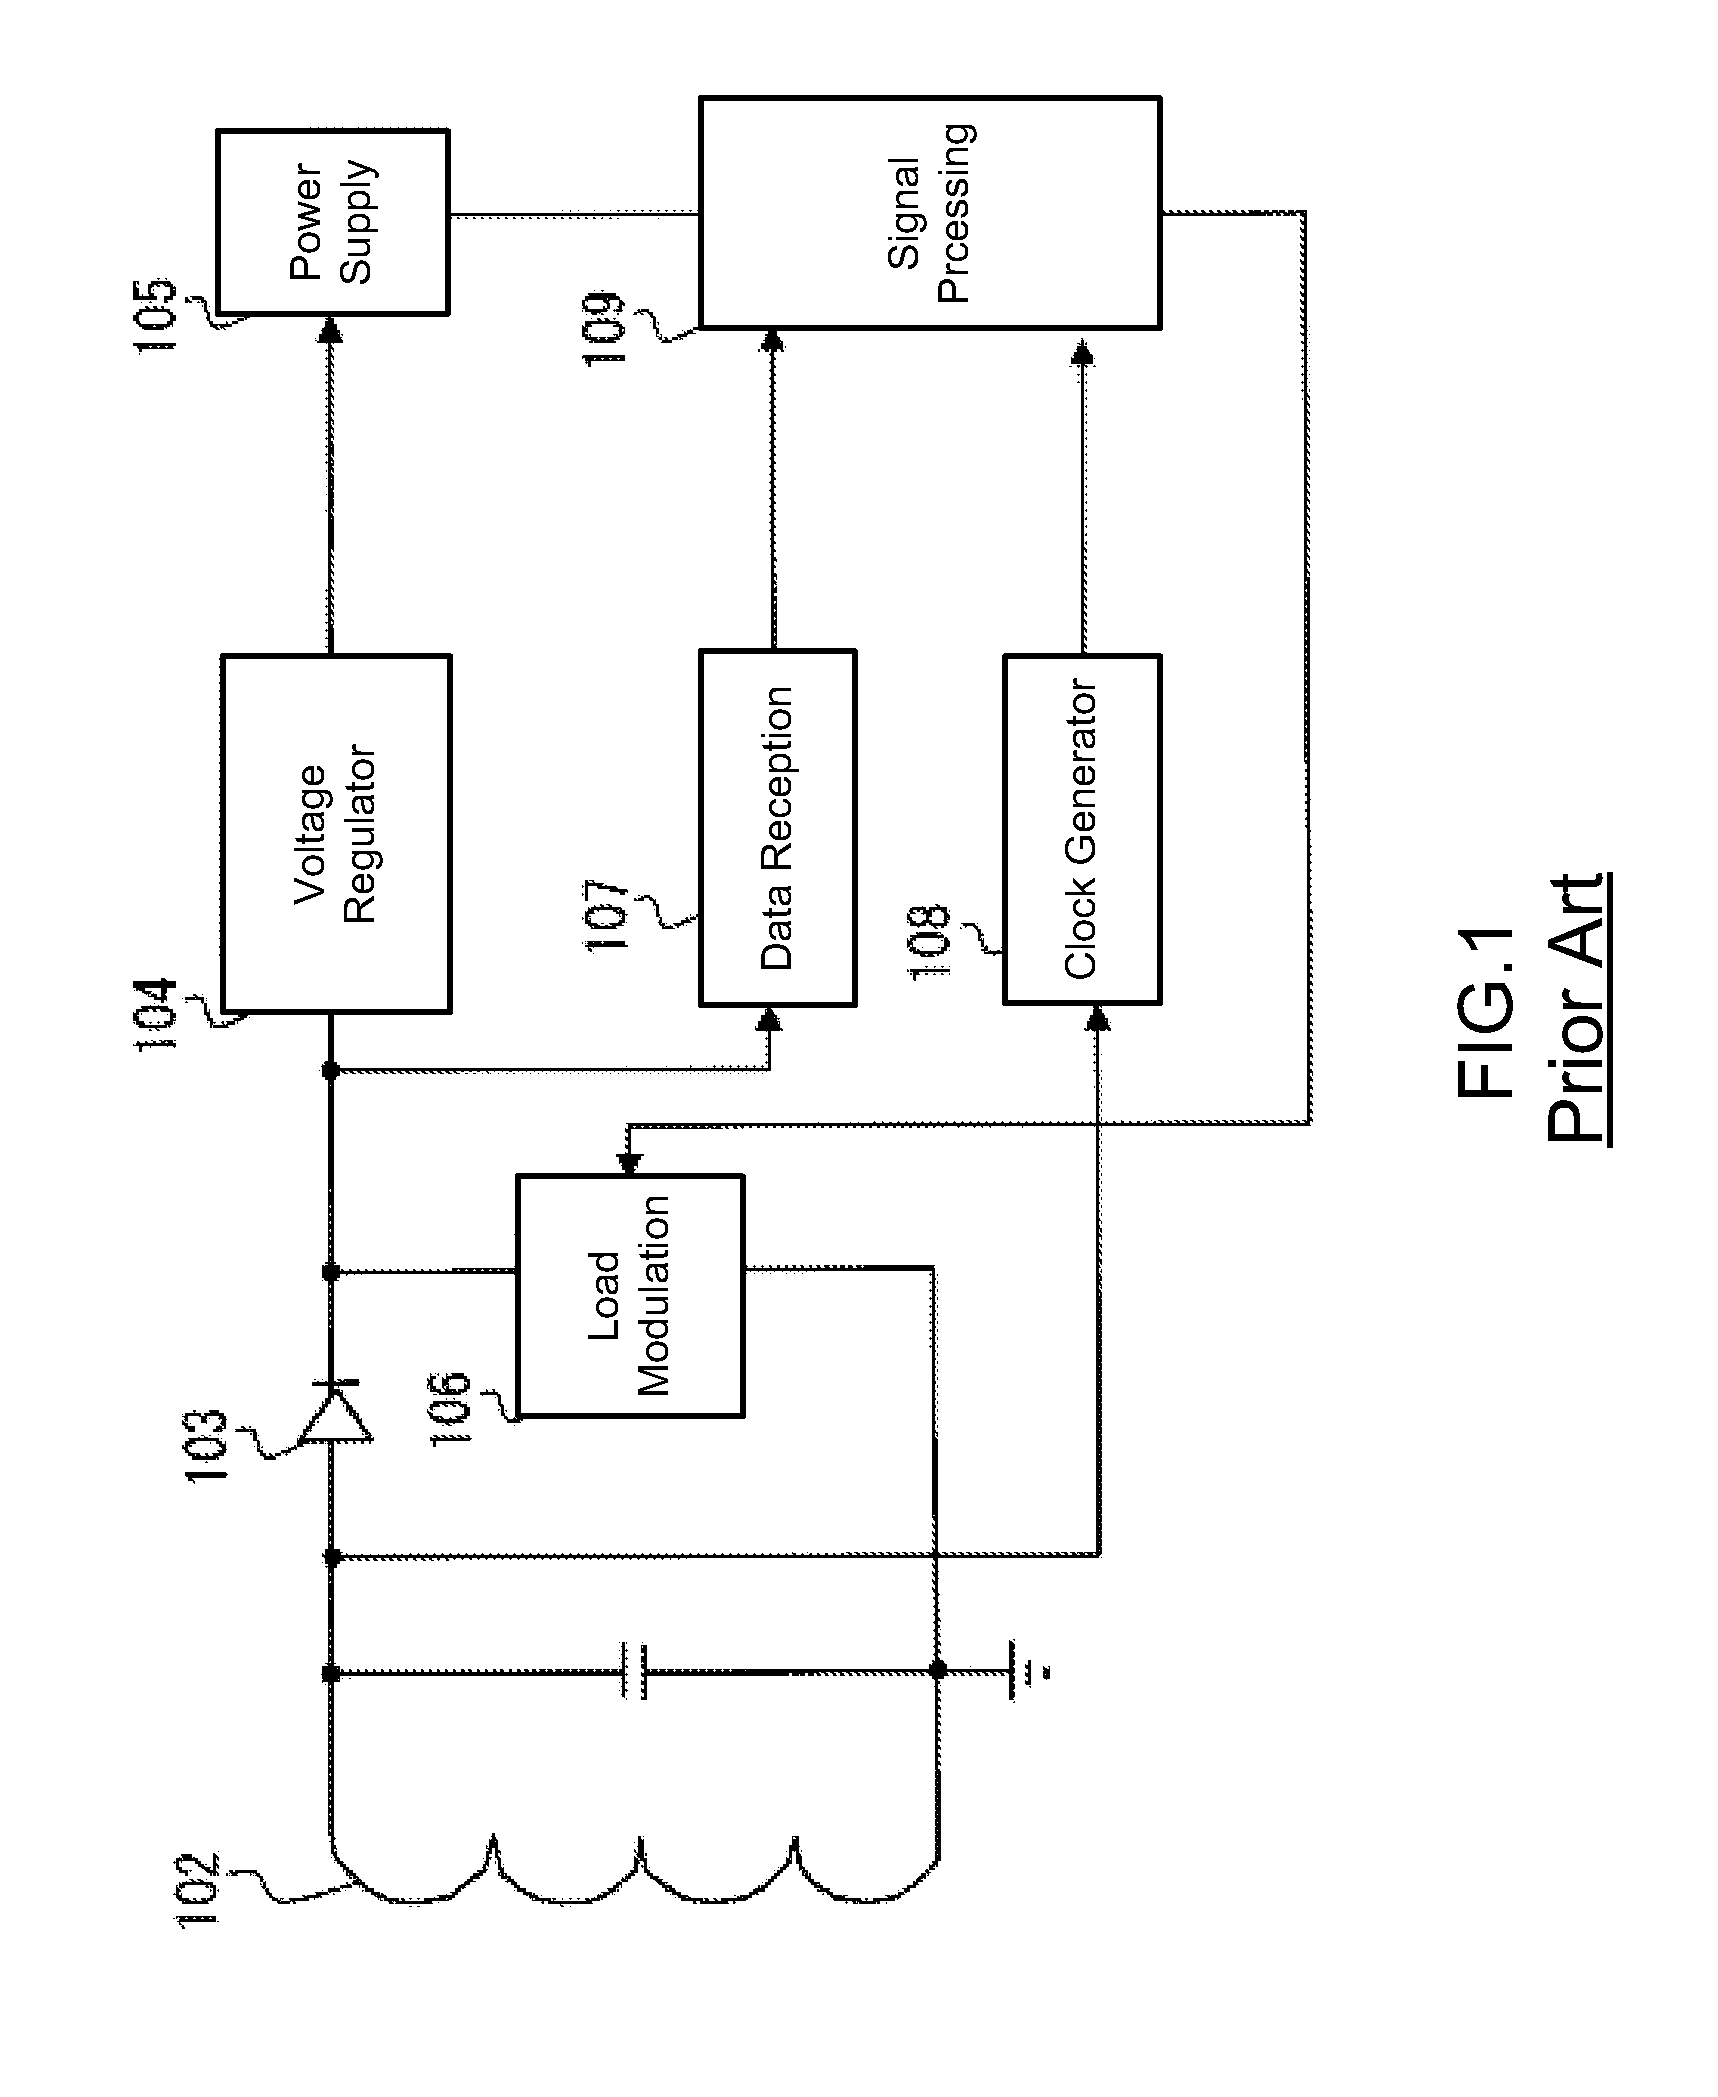 Contactless power reception circuit and contactless power tranmission system